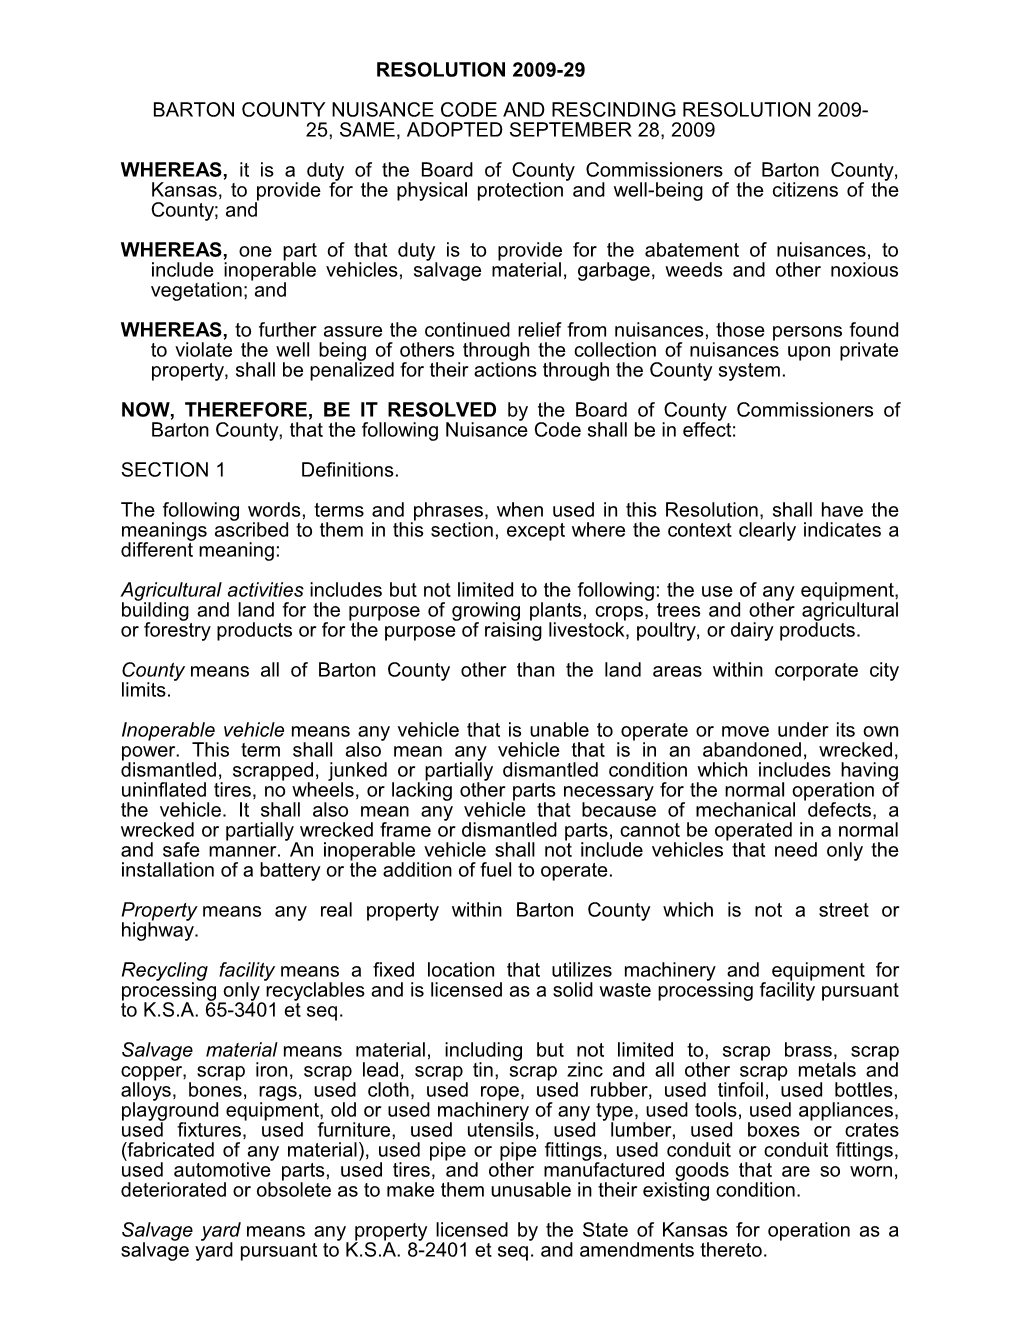 Bartoncounty Nuisance Code and Rescinding Resolution 2009-25, Same, Adopted September 28, 2009